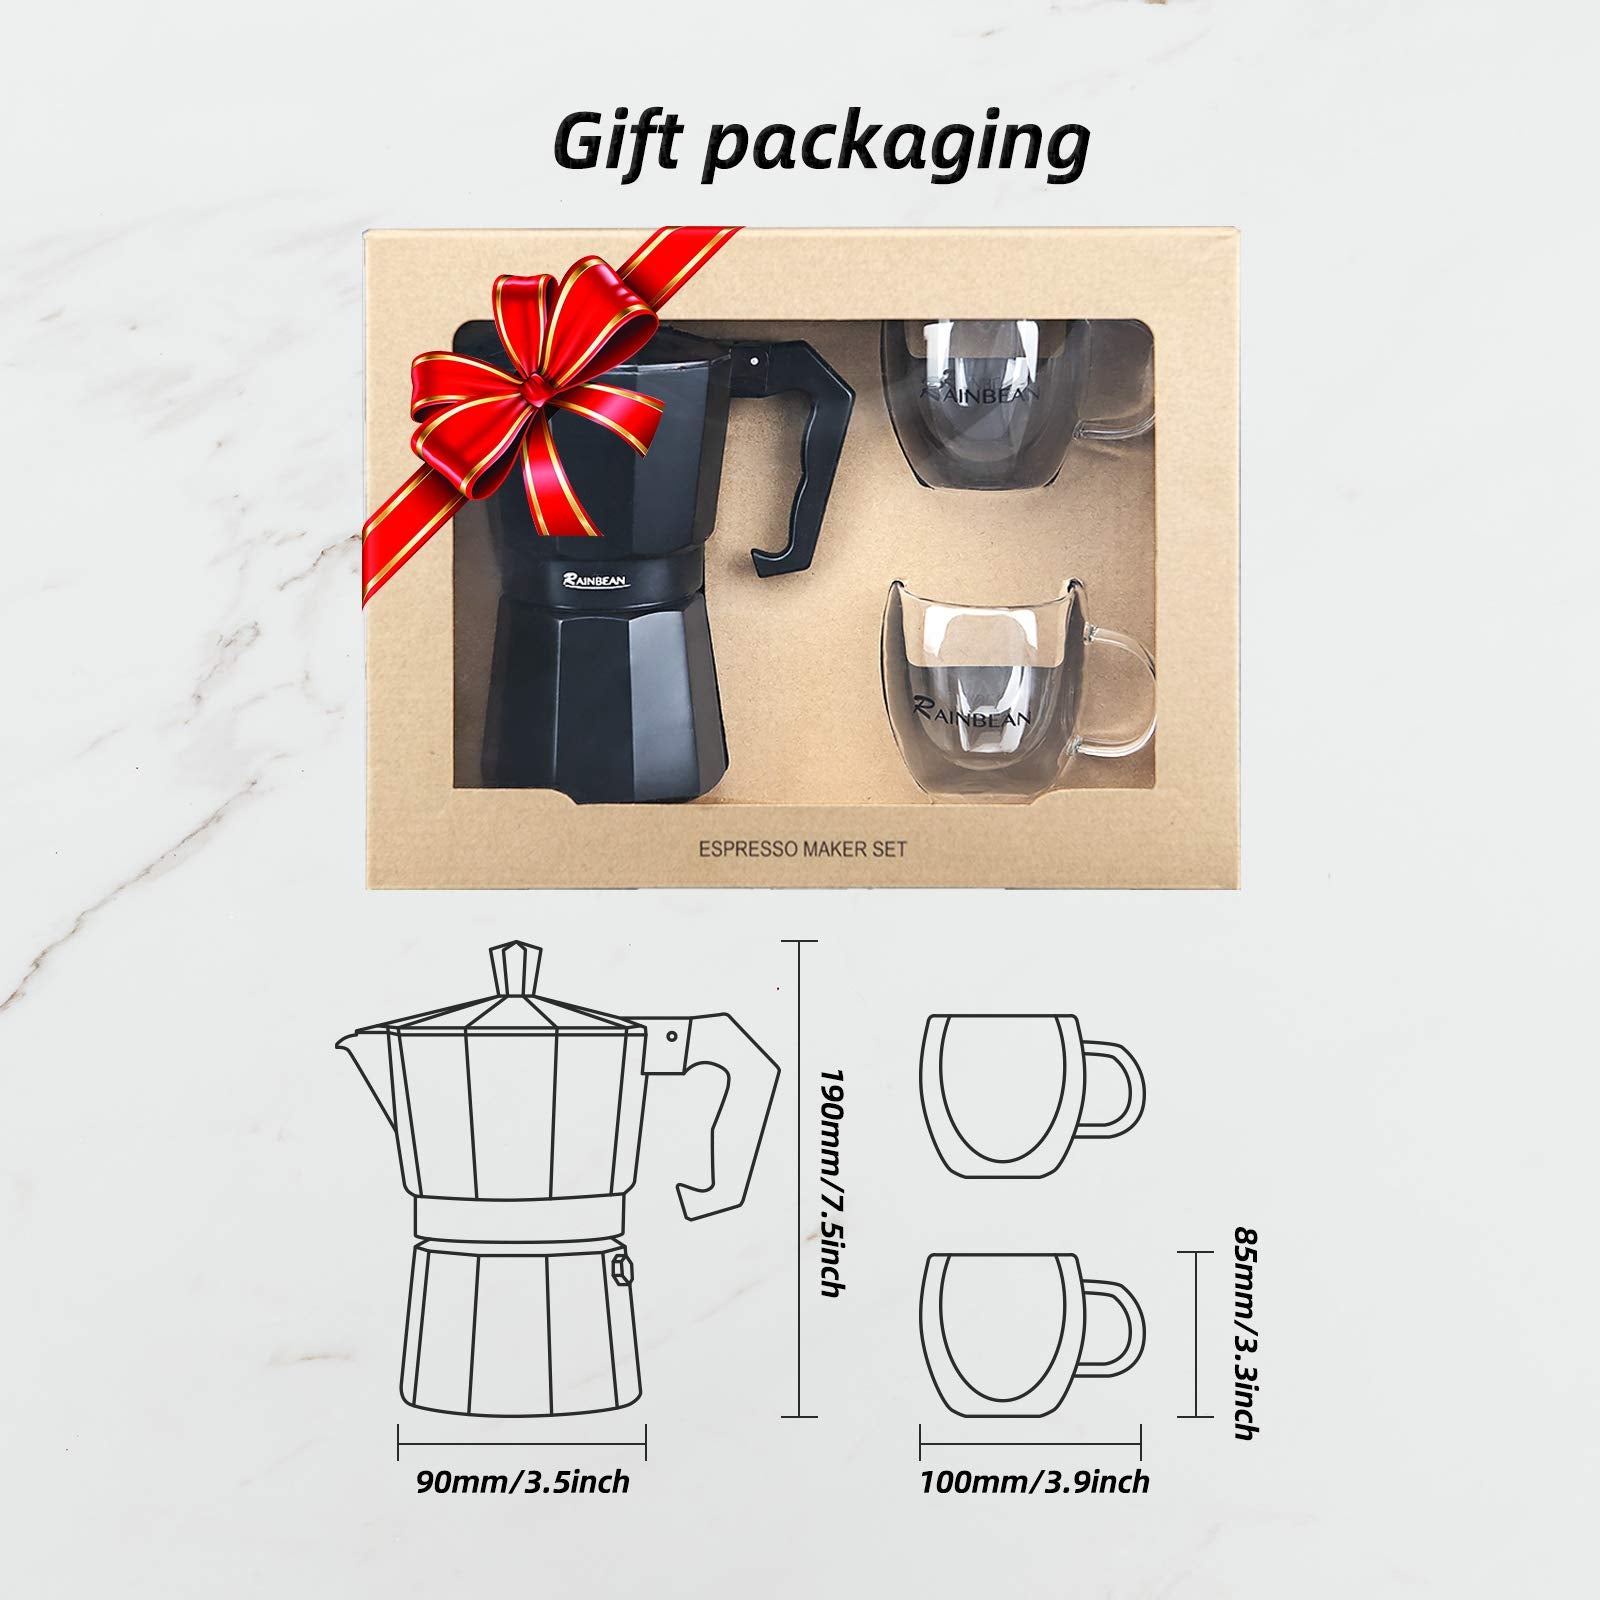 Stovetop Espresso Maker Espresso Cup Moka Pot Classic Cafe Maker Percolator Coffee Maker Italian Espresso for Gas or Electric Aluminum Black Gift package with 2 cups Amazon Platform Banned - Homreo